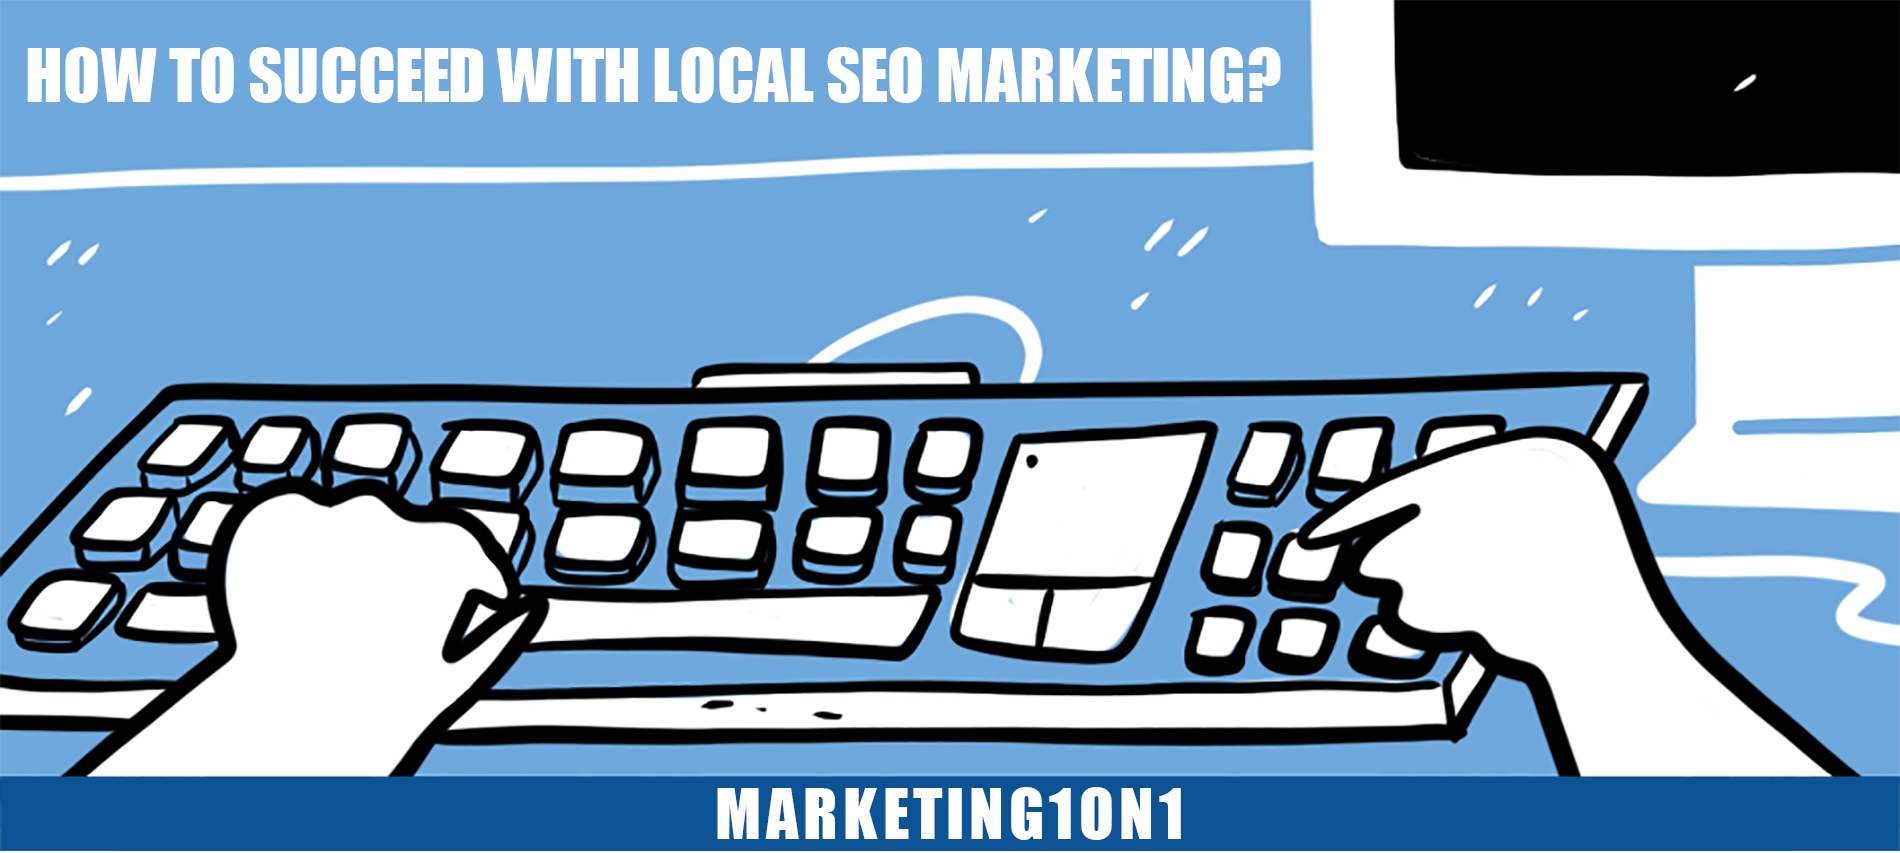 How to succeed with local SEO marketing?